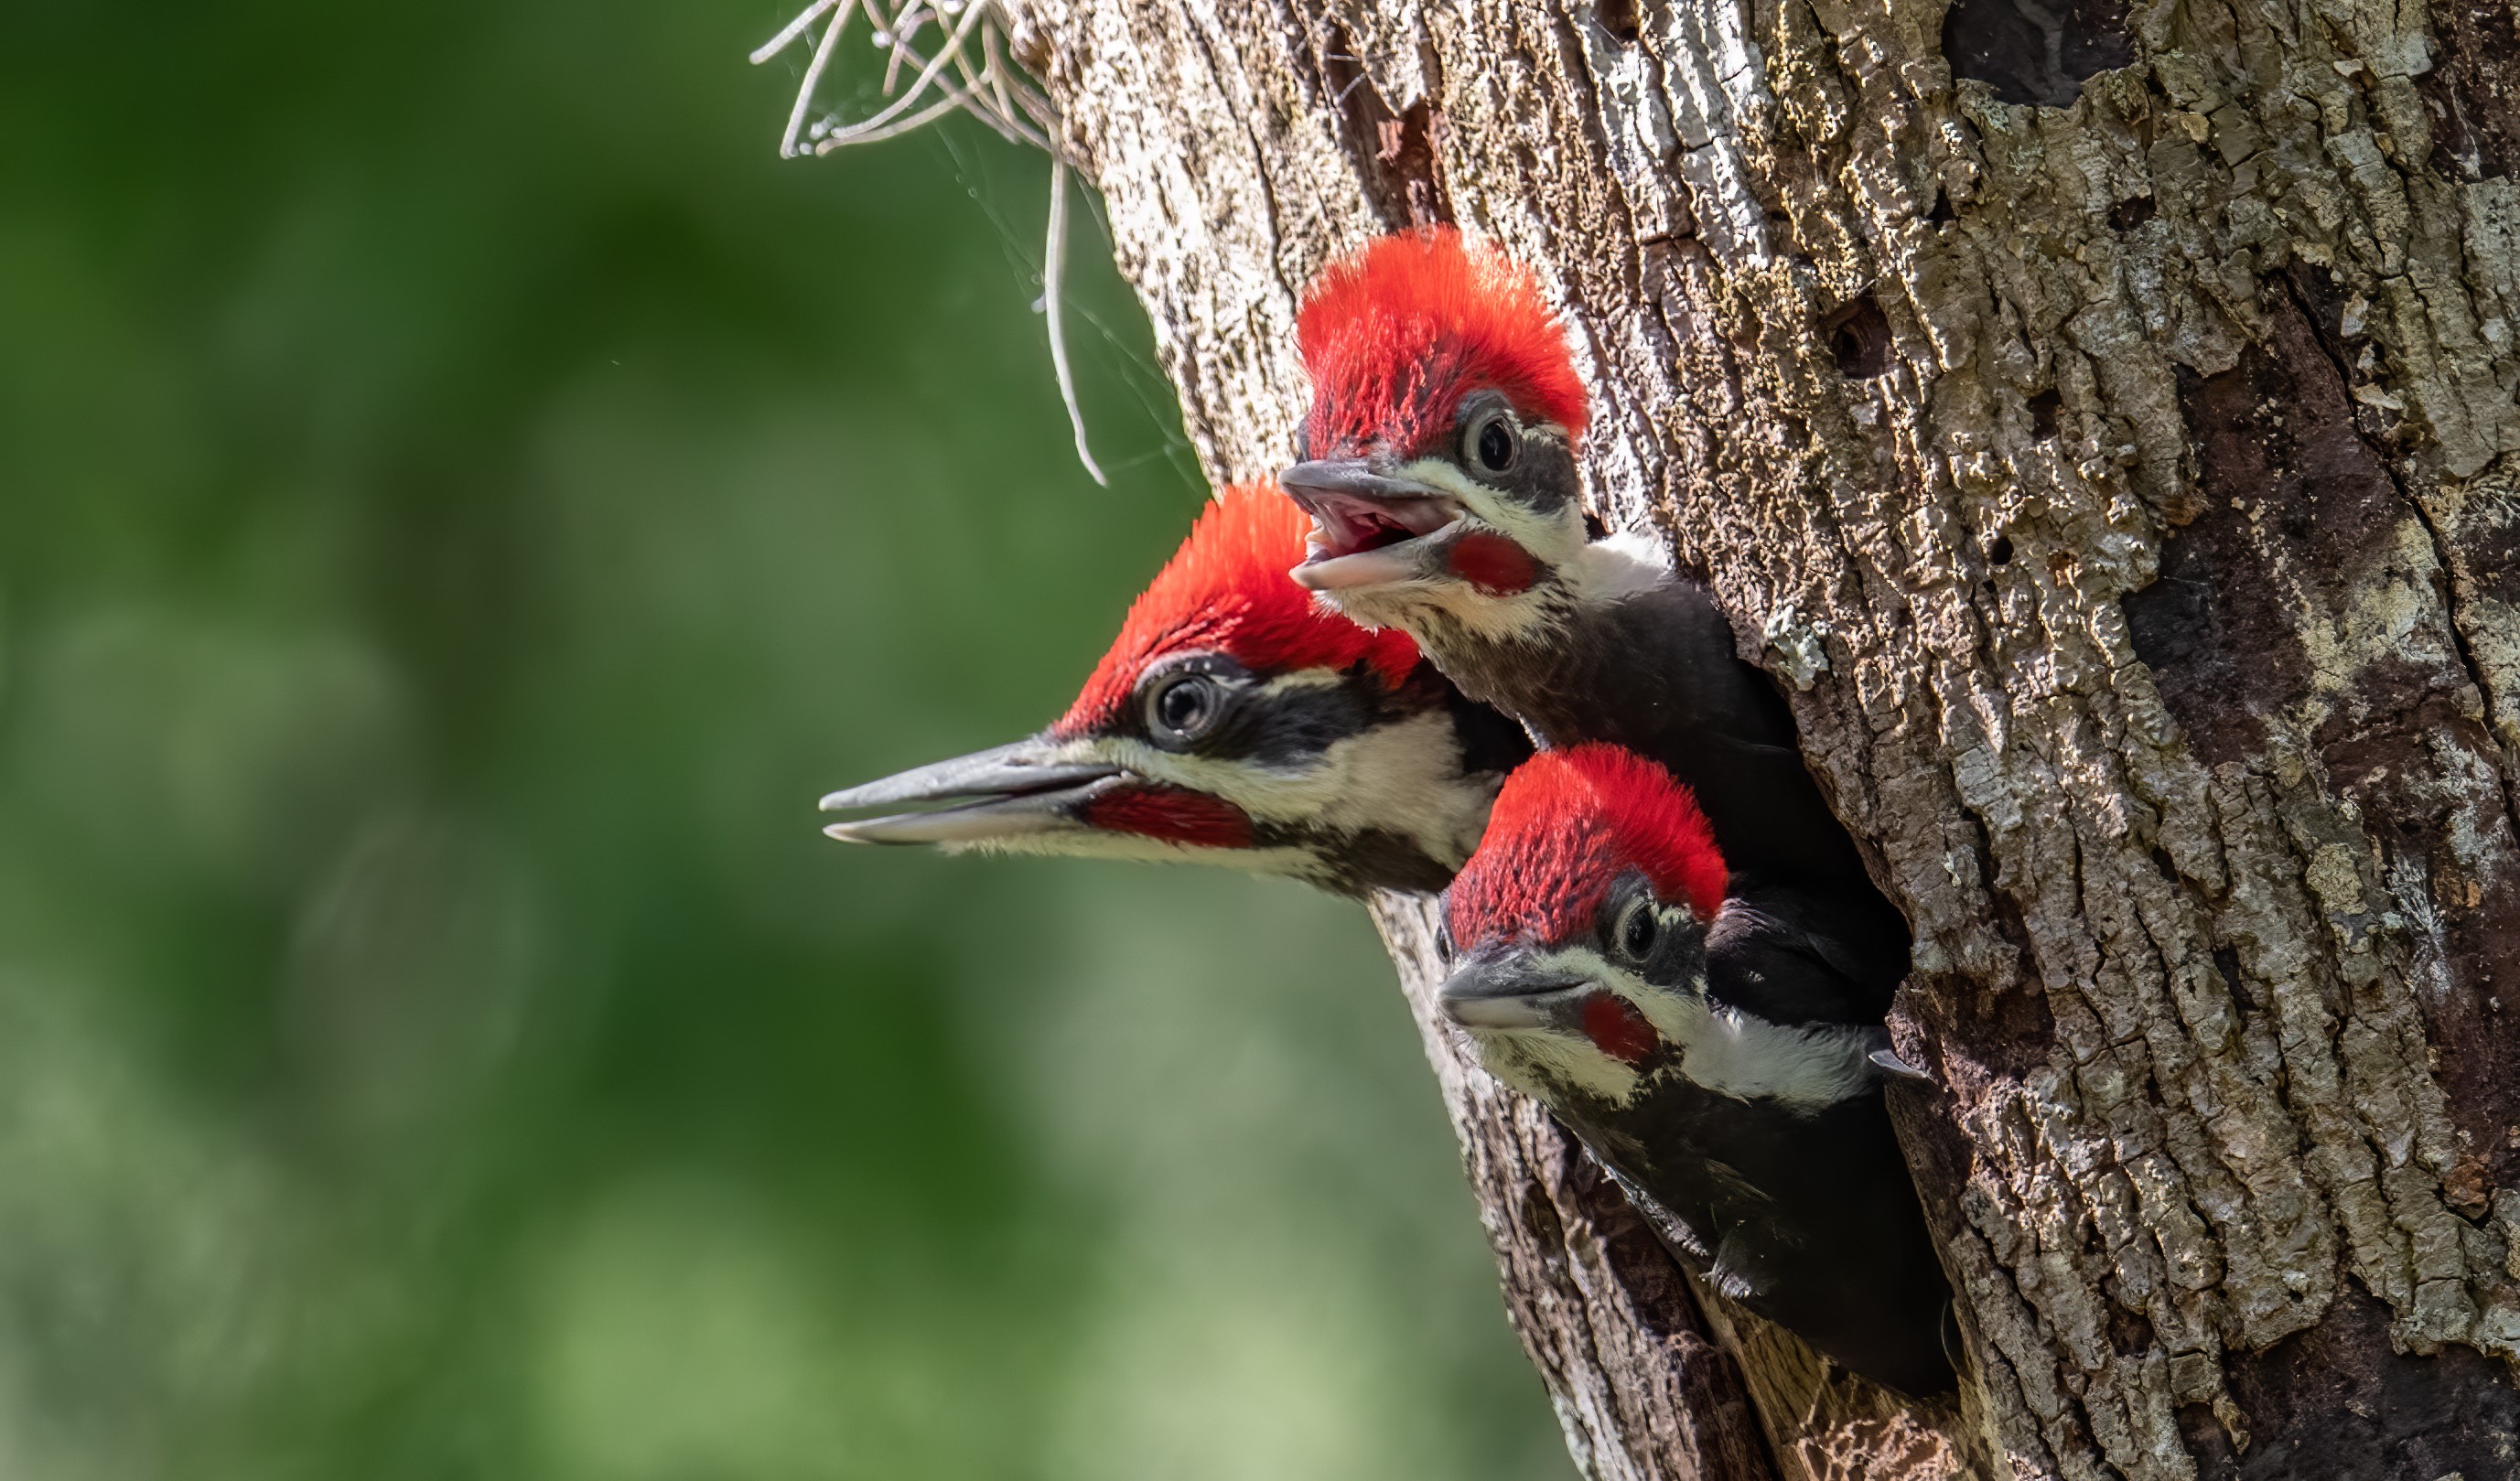 Pileated woodpeckers poking their head out of a tree cavity.